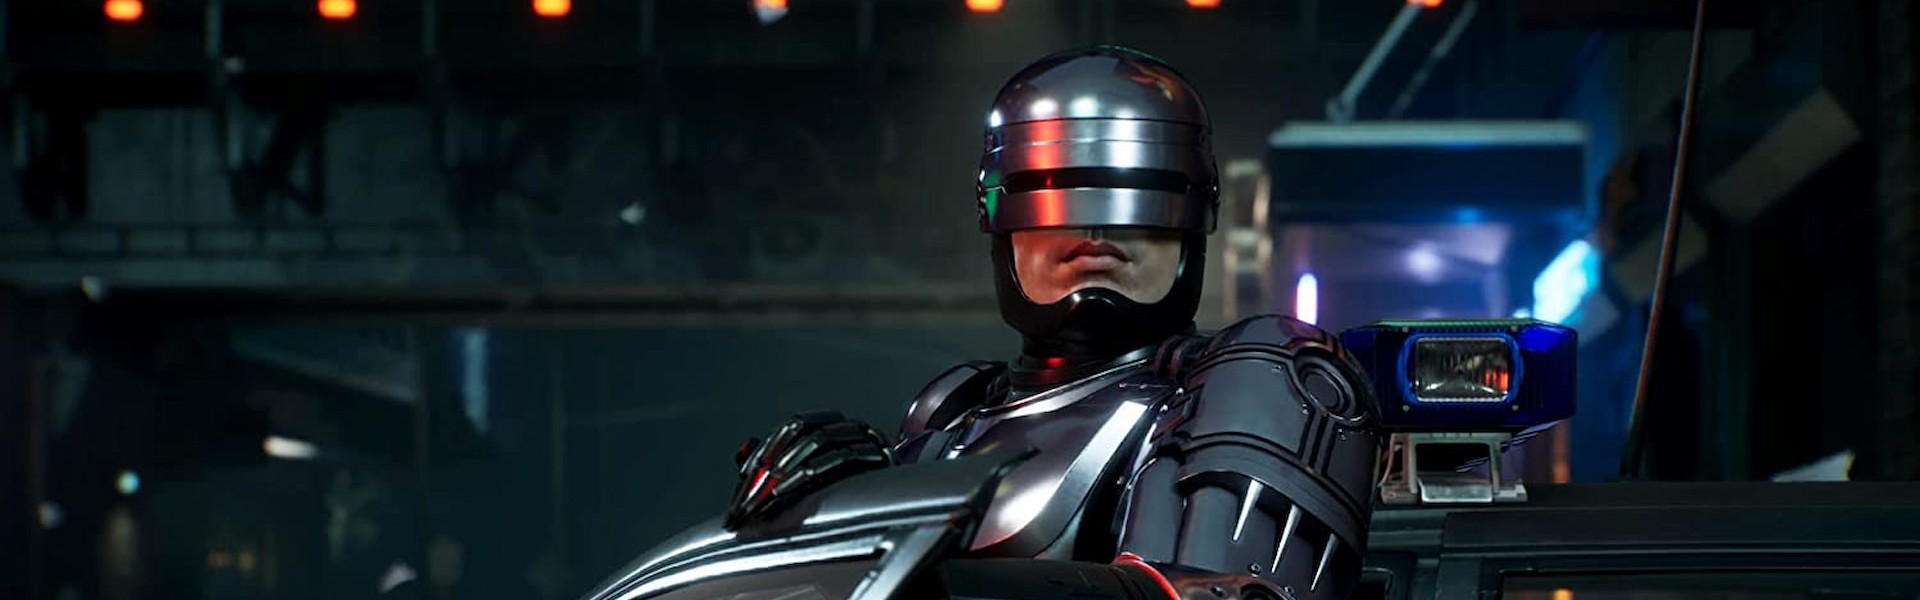 Robocop is back, but is it the return we’ve been waiting for?